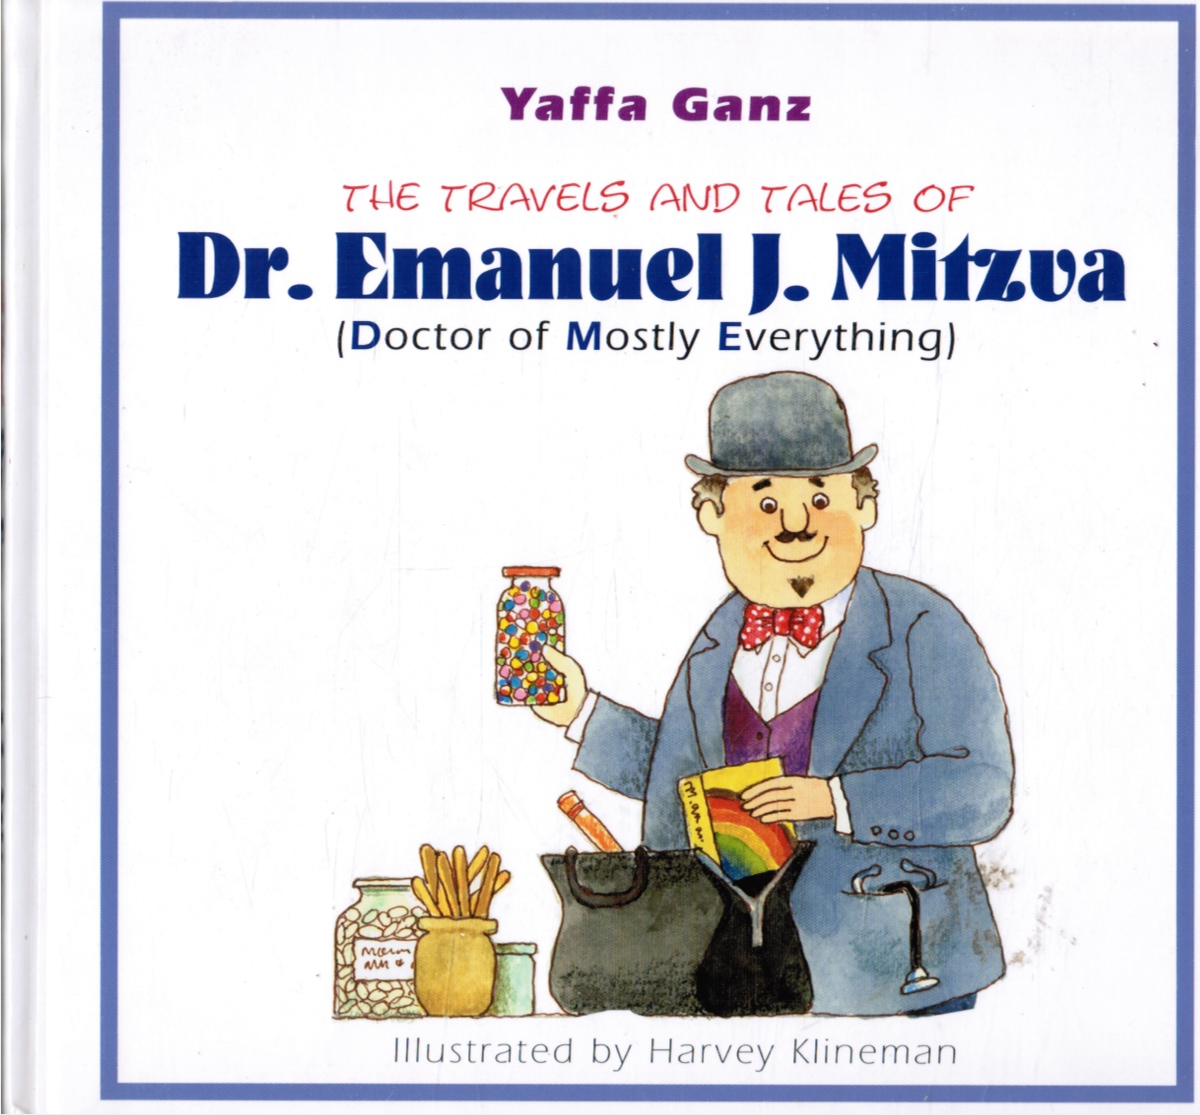 GANZ, YAFFA - The Travels and Tales of Dr. Emanuel J. Mitzva - Doctor of Mostly Everything